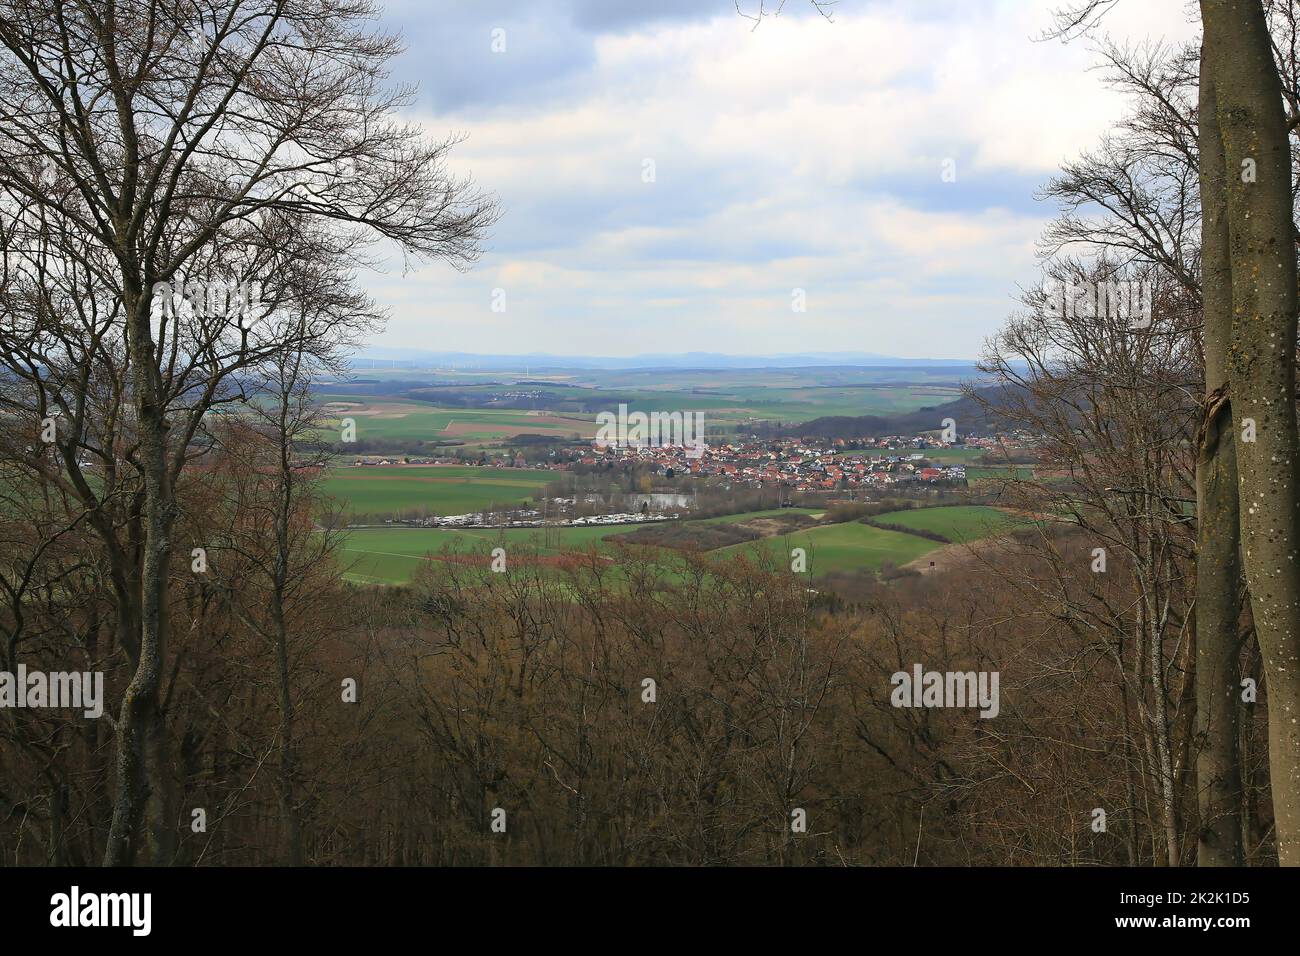 The Wildenberg castle ruins are a sight in the Sulzfeld municipality Stock Photo